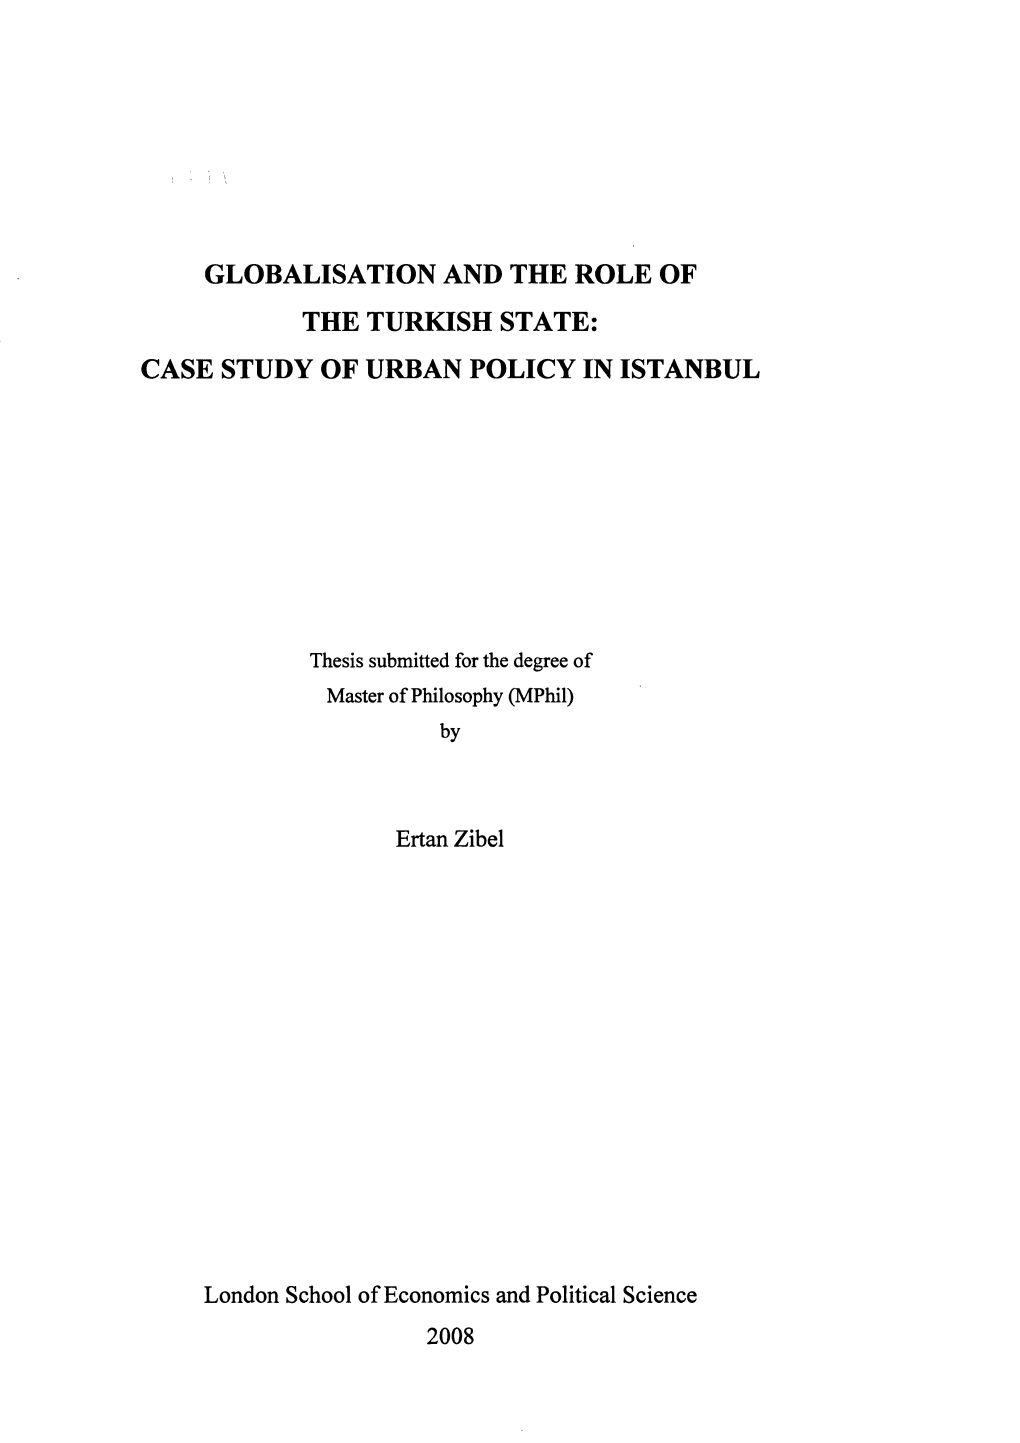 Globalisation and the Role of the Turkish State: Case Study of Urban Policy in Istanbul